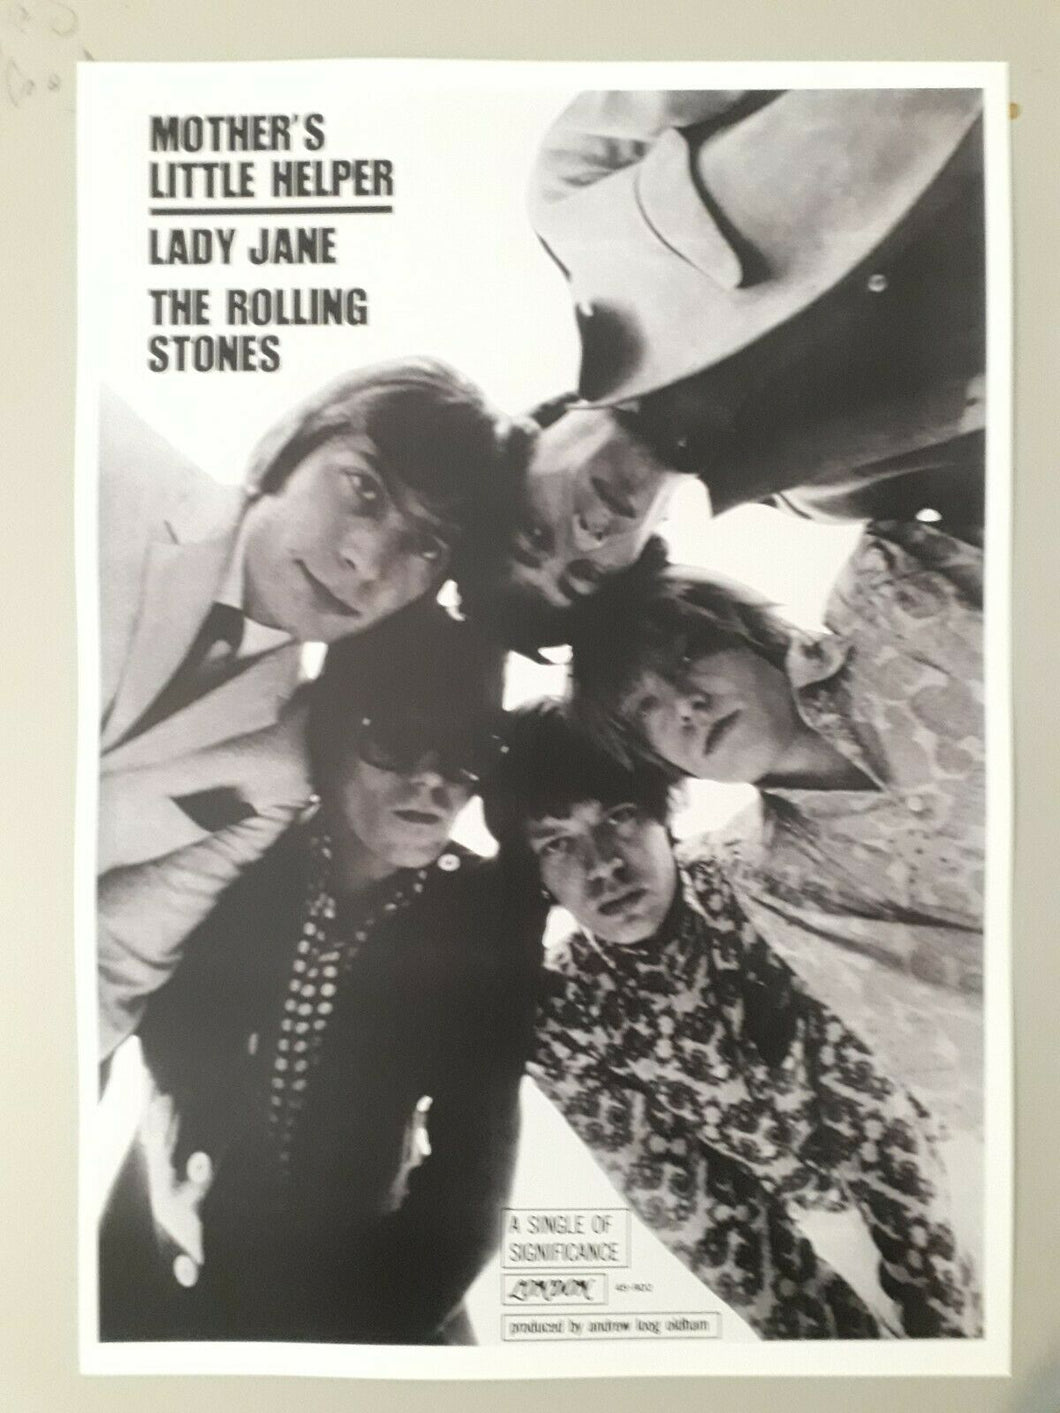 Rolling Stones promotional poster - Lady Jane 1966 reprinted edition A3 size - Original Music and Movie Posters for sale from Bamalama - Online Poster Store UK London